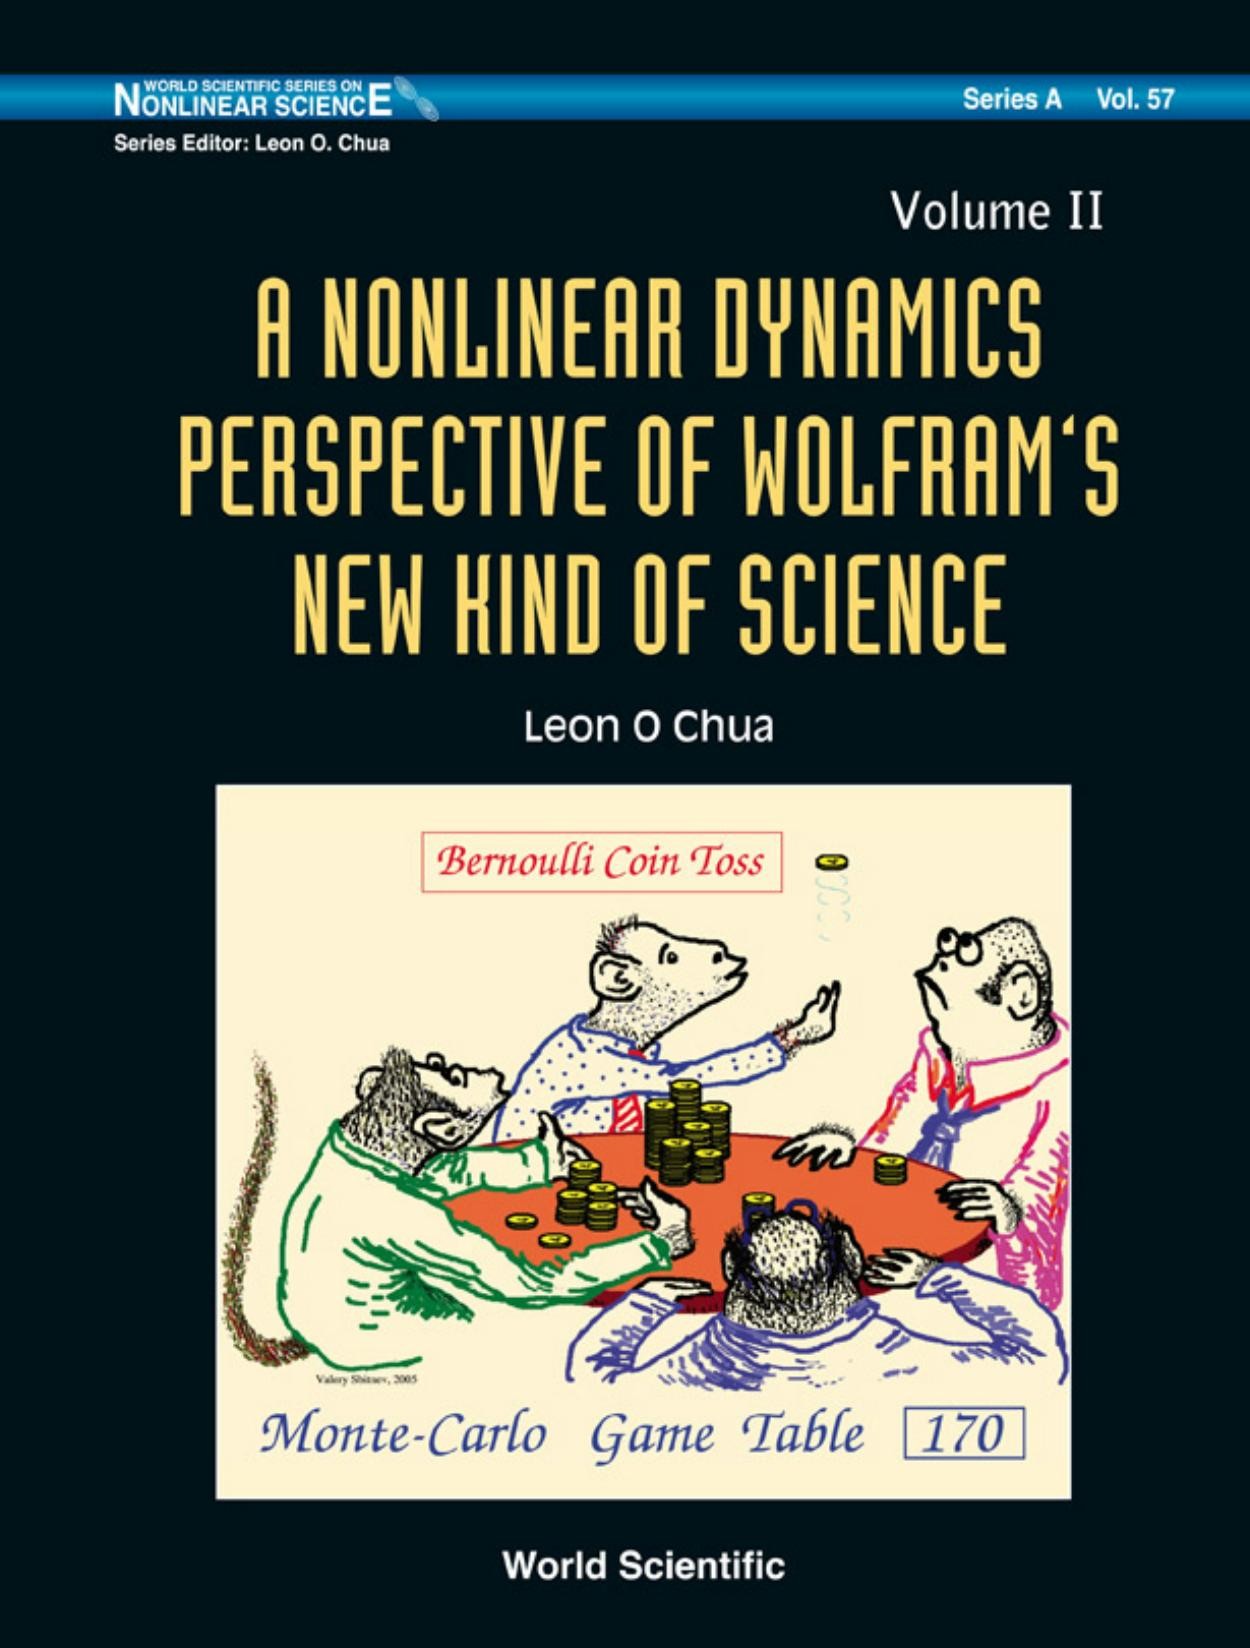 A Nonlinear Dynamics Perspective of Wolfram's New Kind of Science - Volume 4